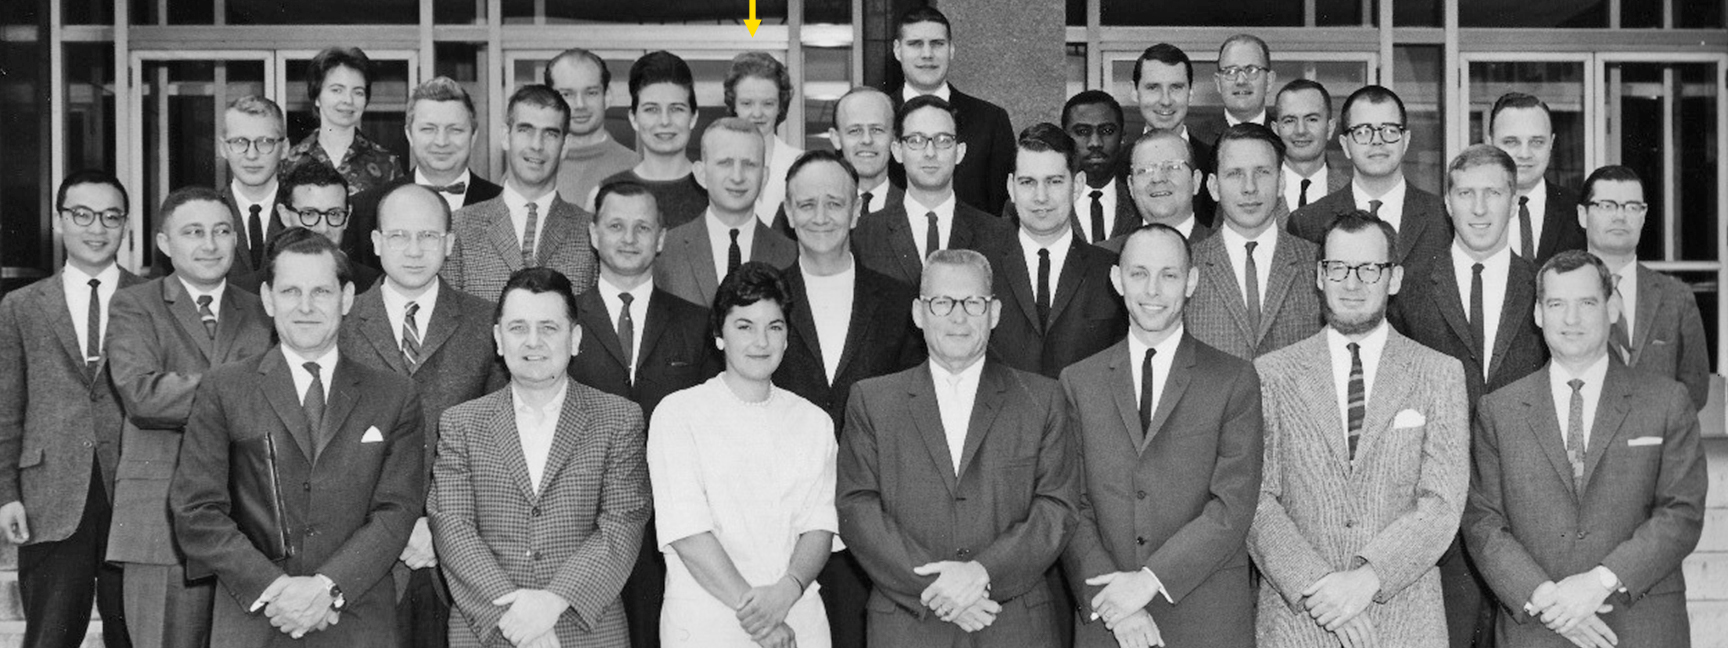 Dr. Helen F. Frevel in a 1964 UCSF Anesthesia faculty and trainees group photo